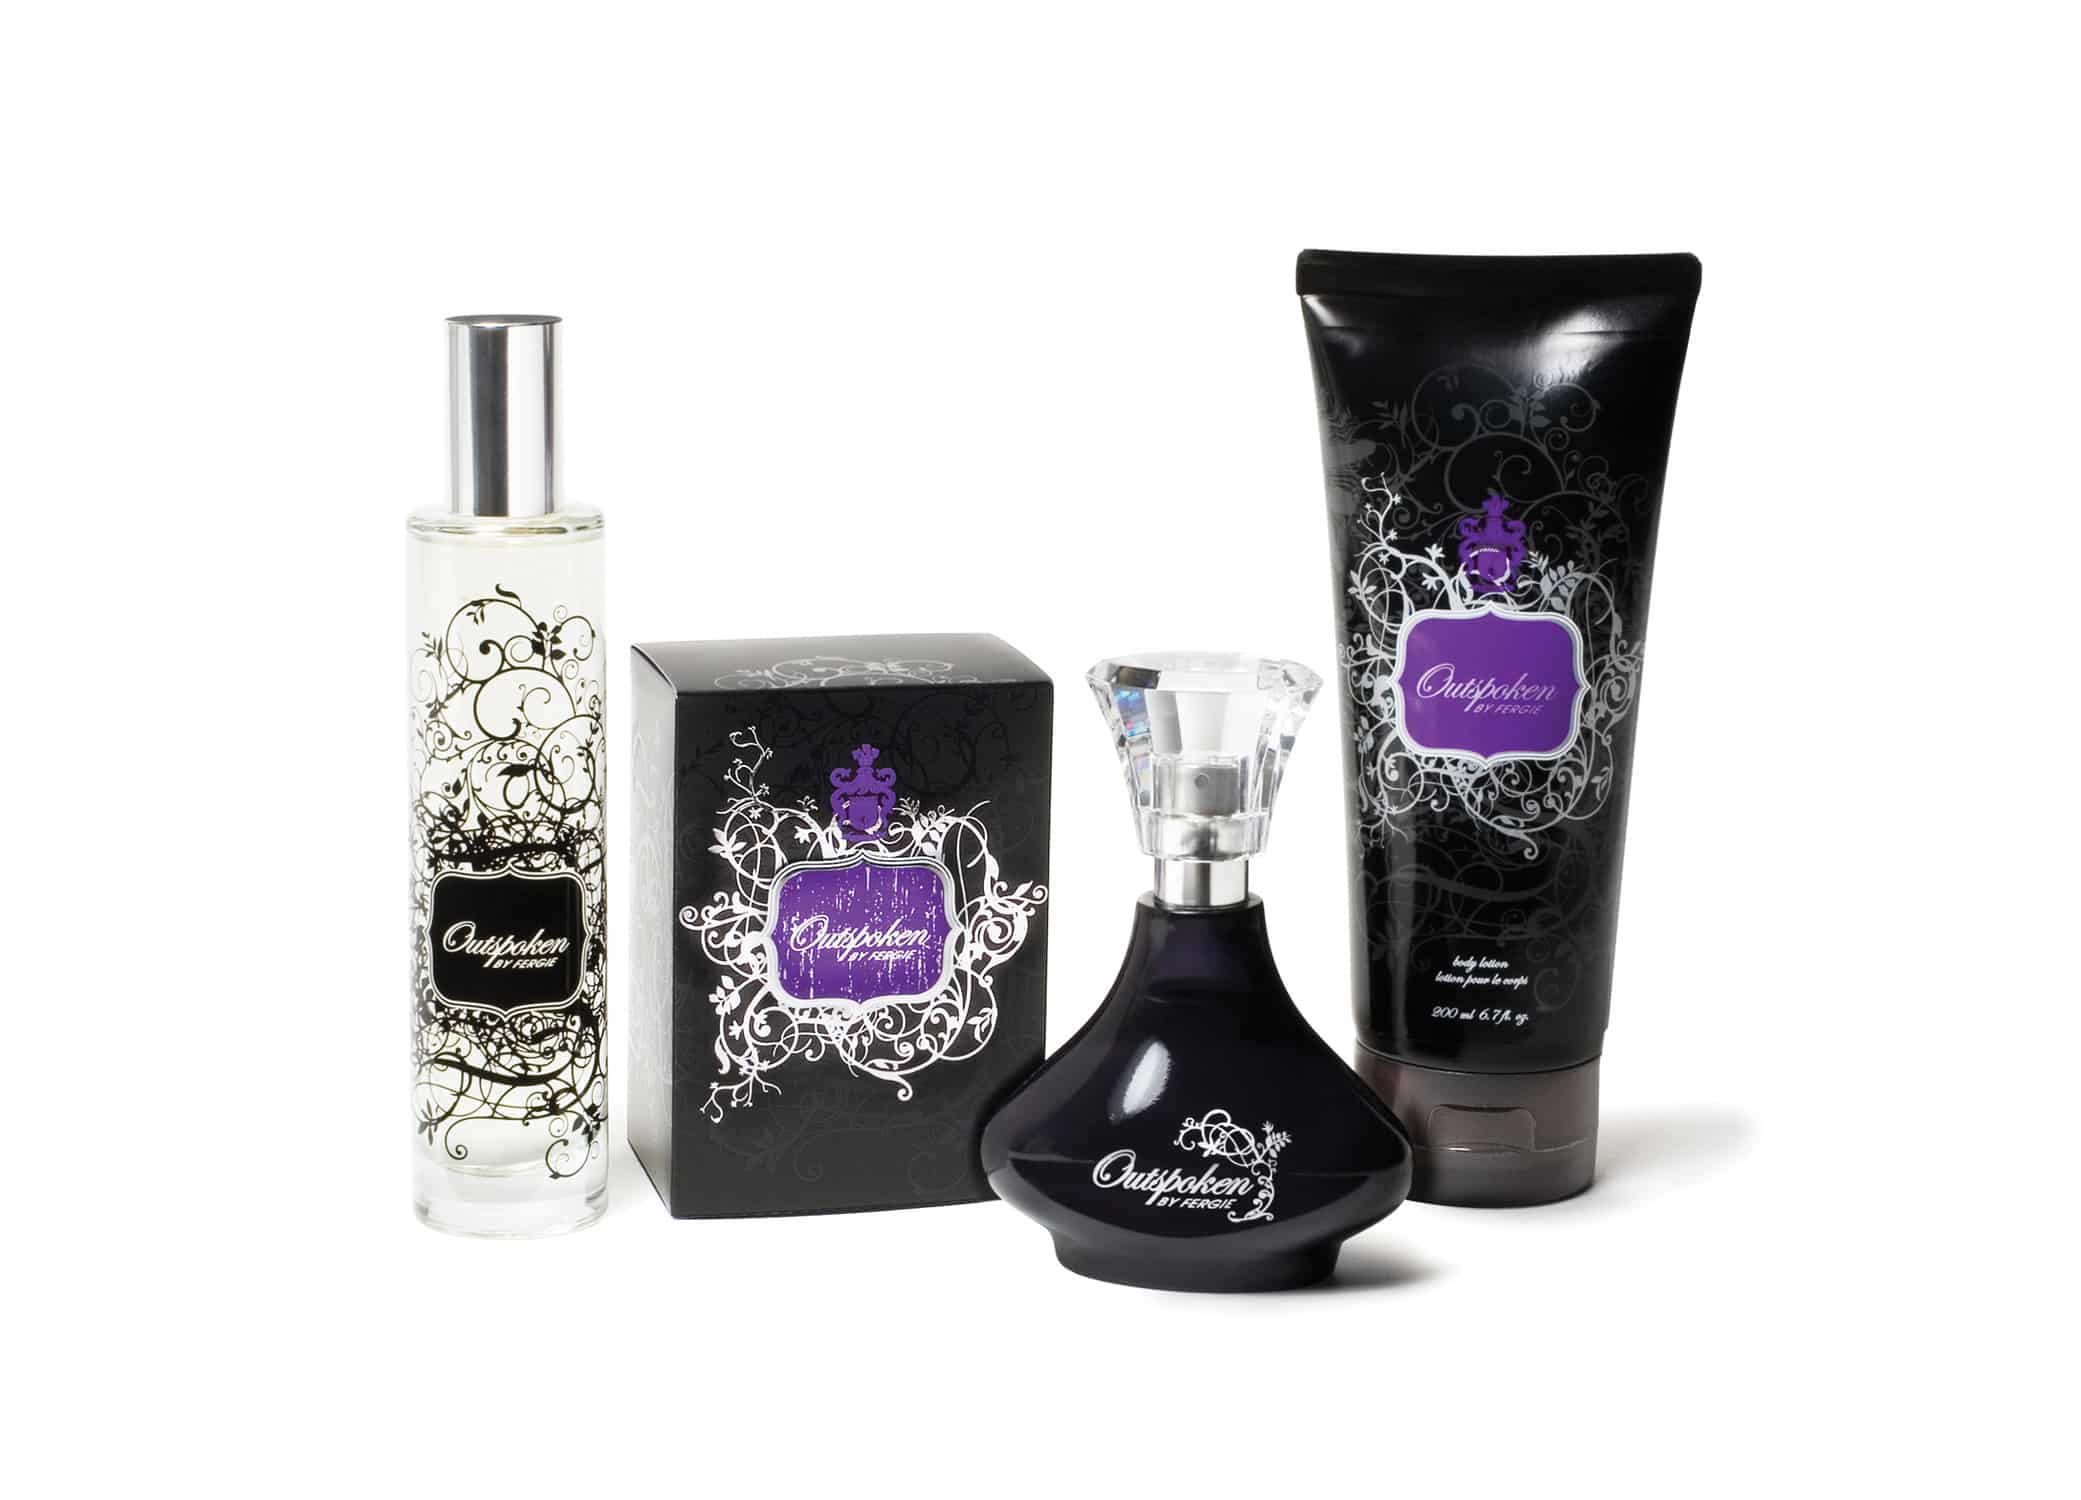 Avon Outspoken by Fergie fragrance line with black glass perfume packaging, purple designs, and script font.